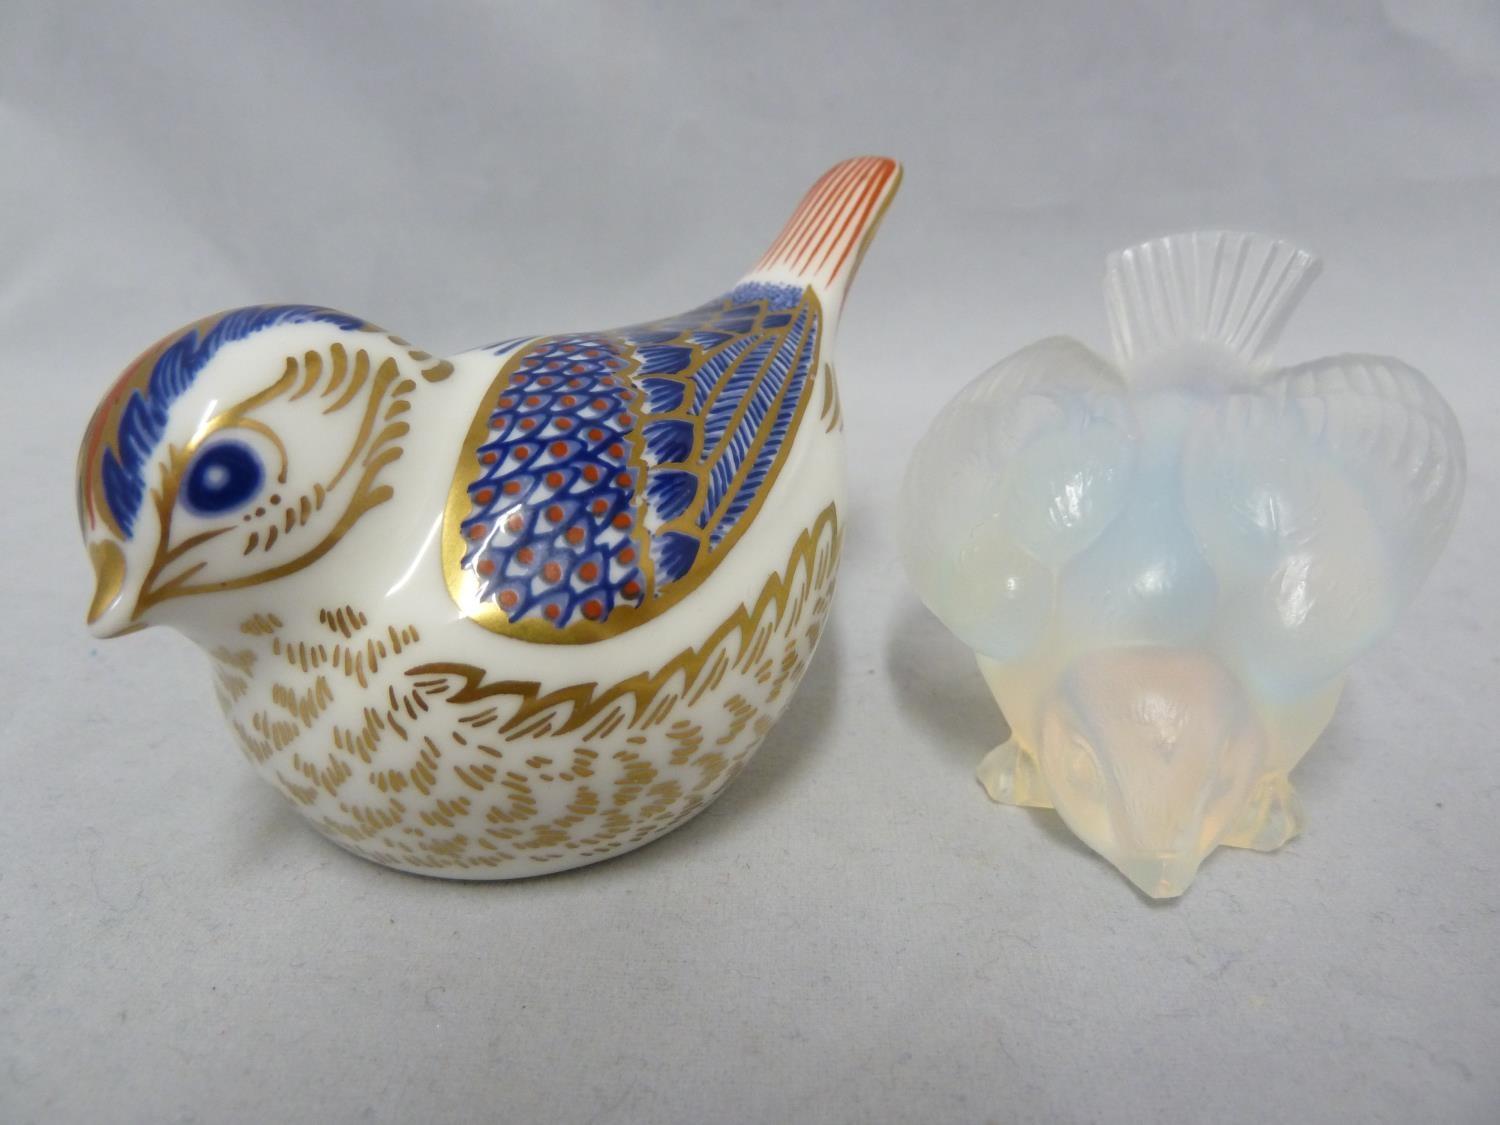 A Sabino glass bird, marked Sabino France; and a Royal Crown Derby Goldcrest bird paperweight, in